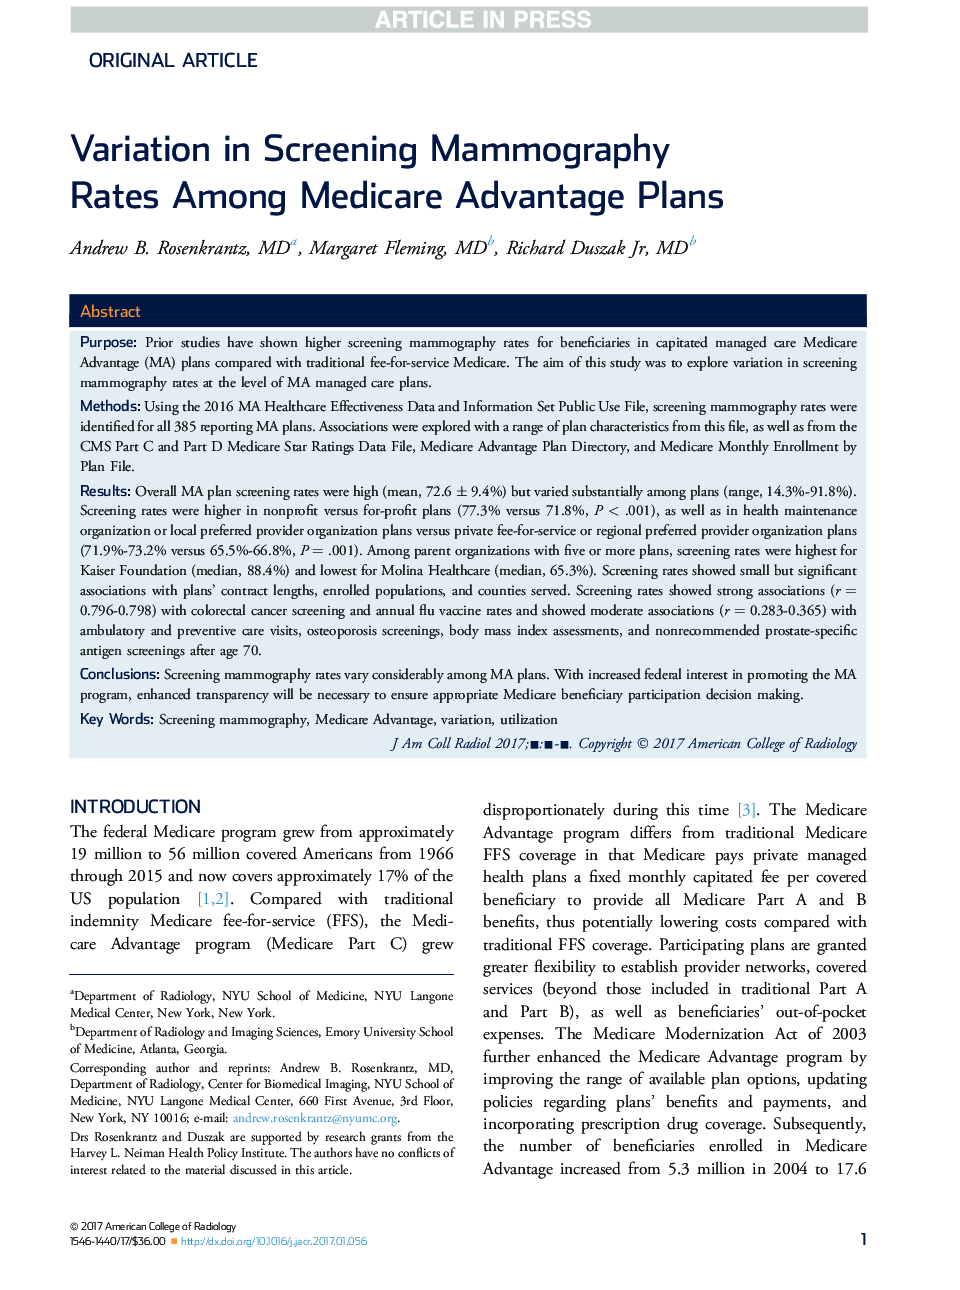 Variation in Screening Mammography Rates Among Medicare Advantage Plans